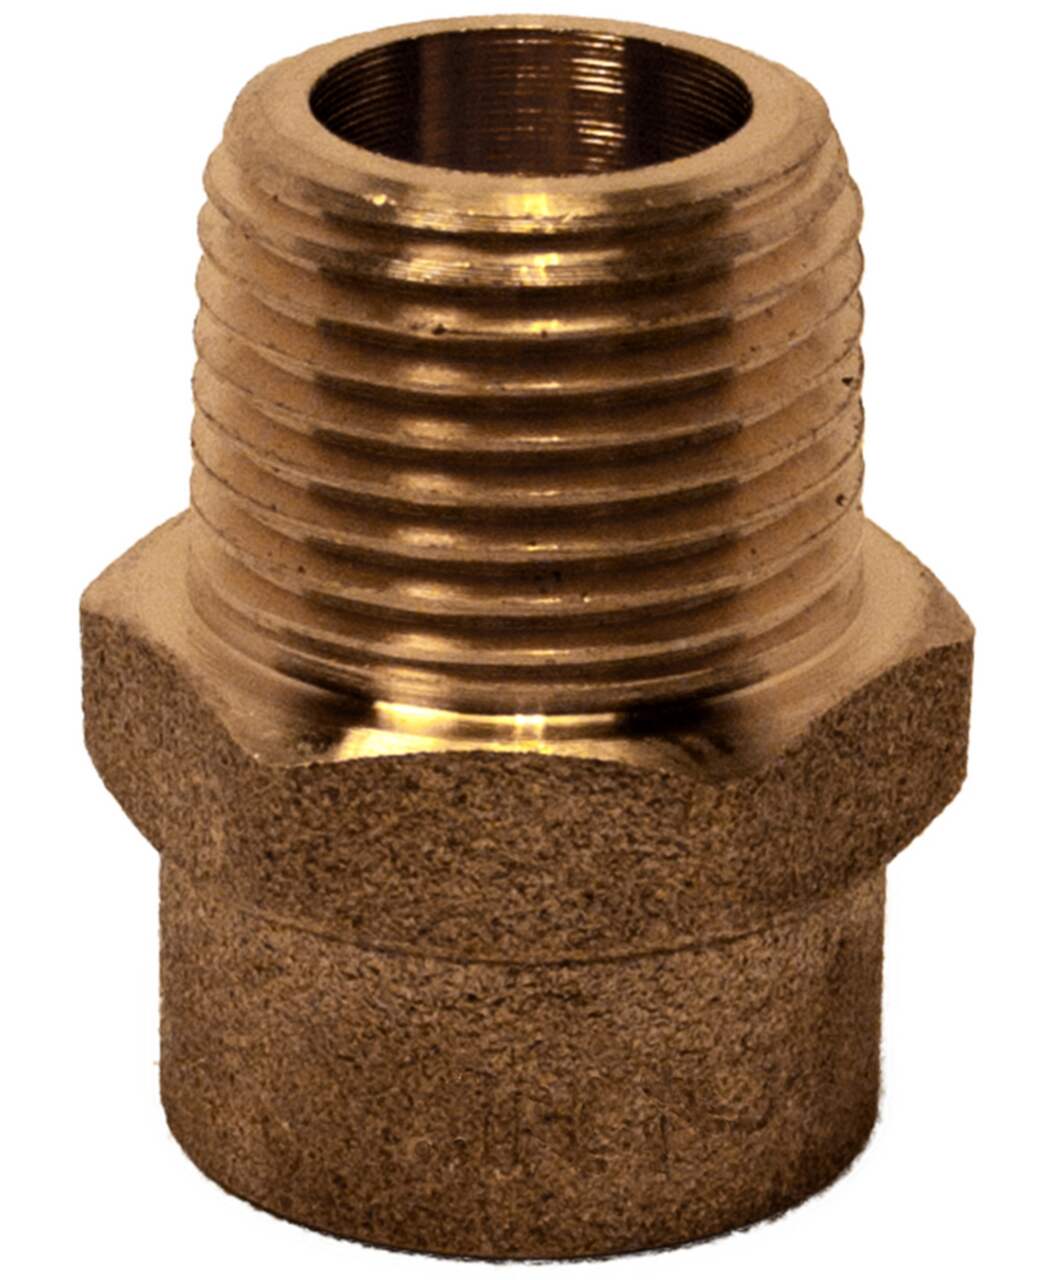 https://media-www.canadiantire.ca/product/fixing/plumbing/rough-plumbing/0631123/adapter-1-2-3-8-mpt-5b71189c-cc38-4fbe-baf3-56e60f8f35aa.png?imdensity=1&imwidth=640&impolicy=mZoom